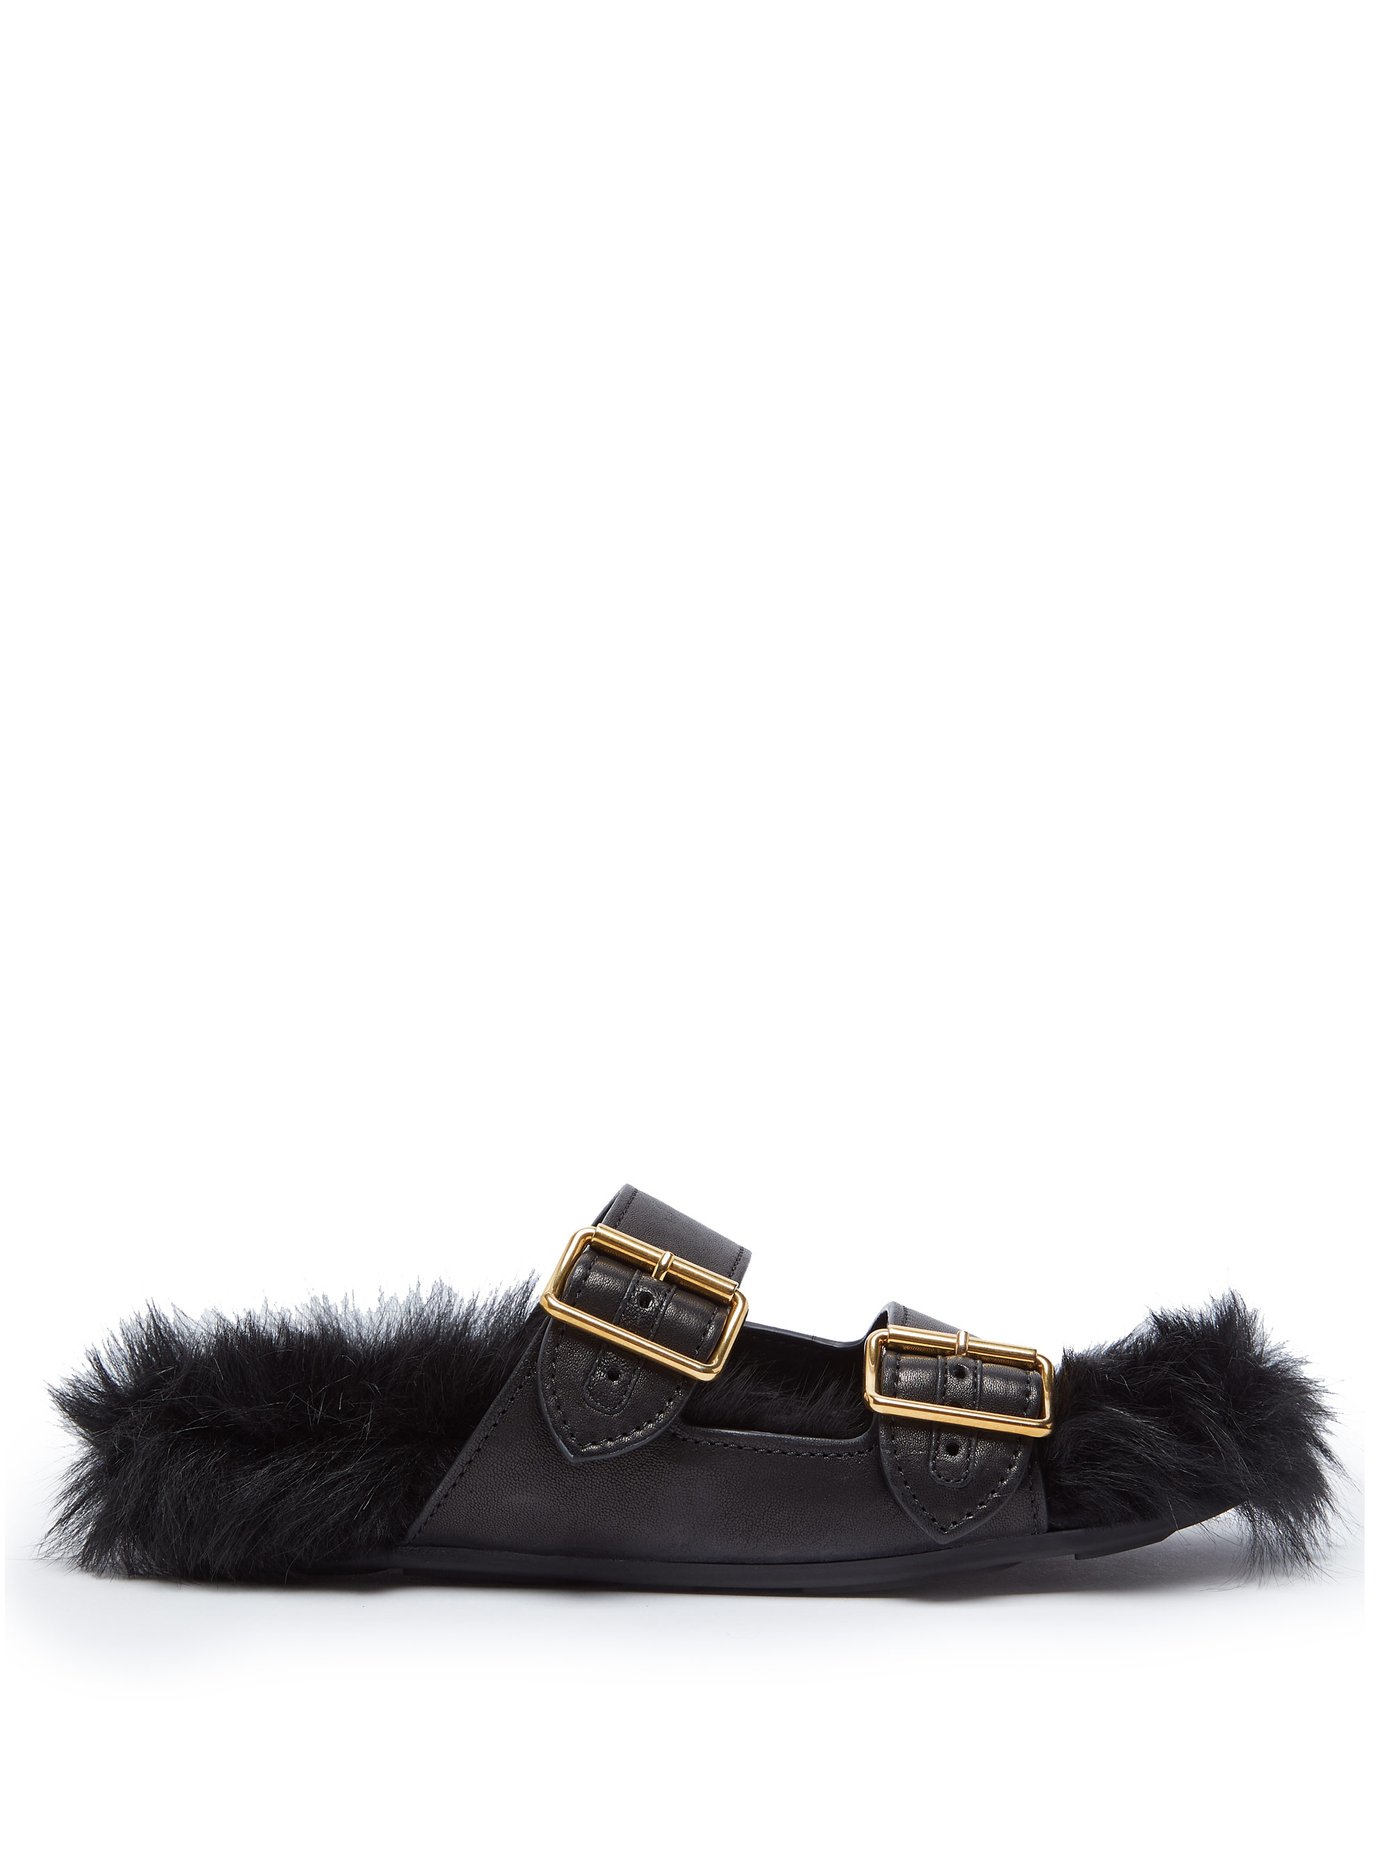 Shearling-lined leather sandals | Prada 